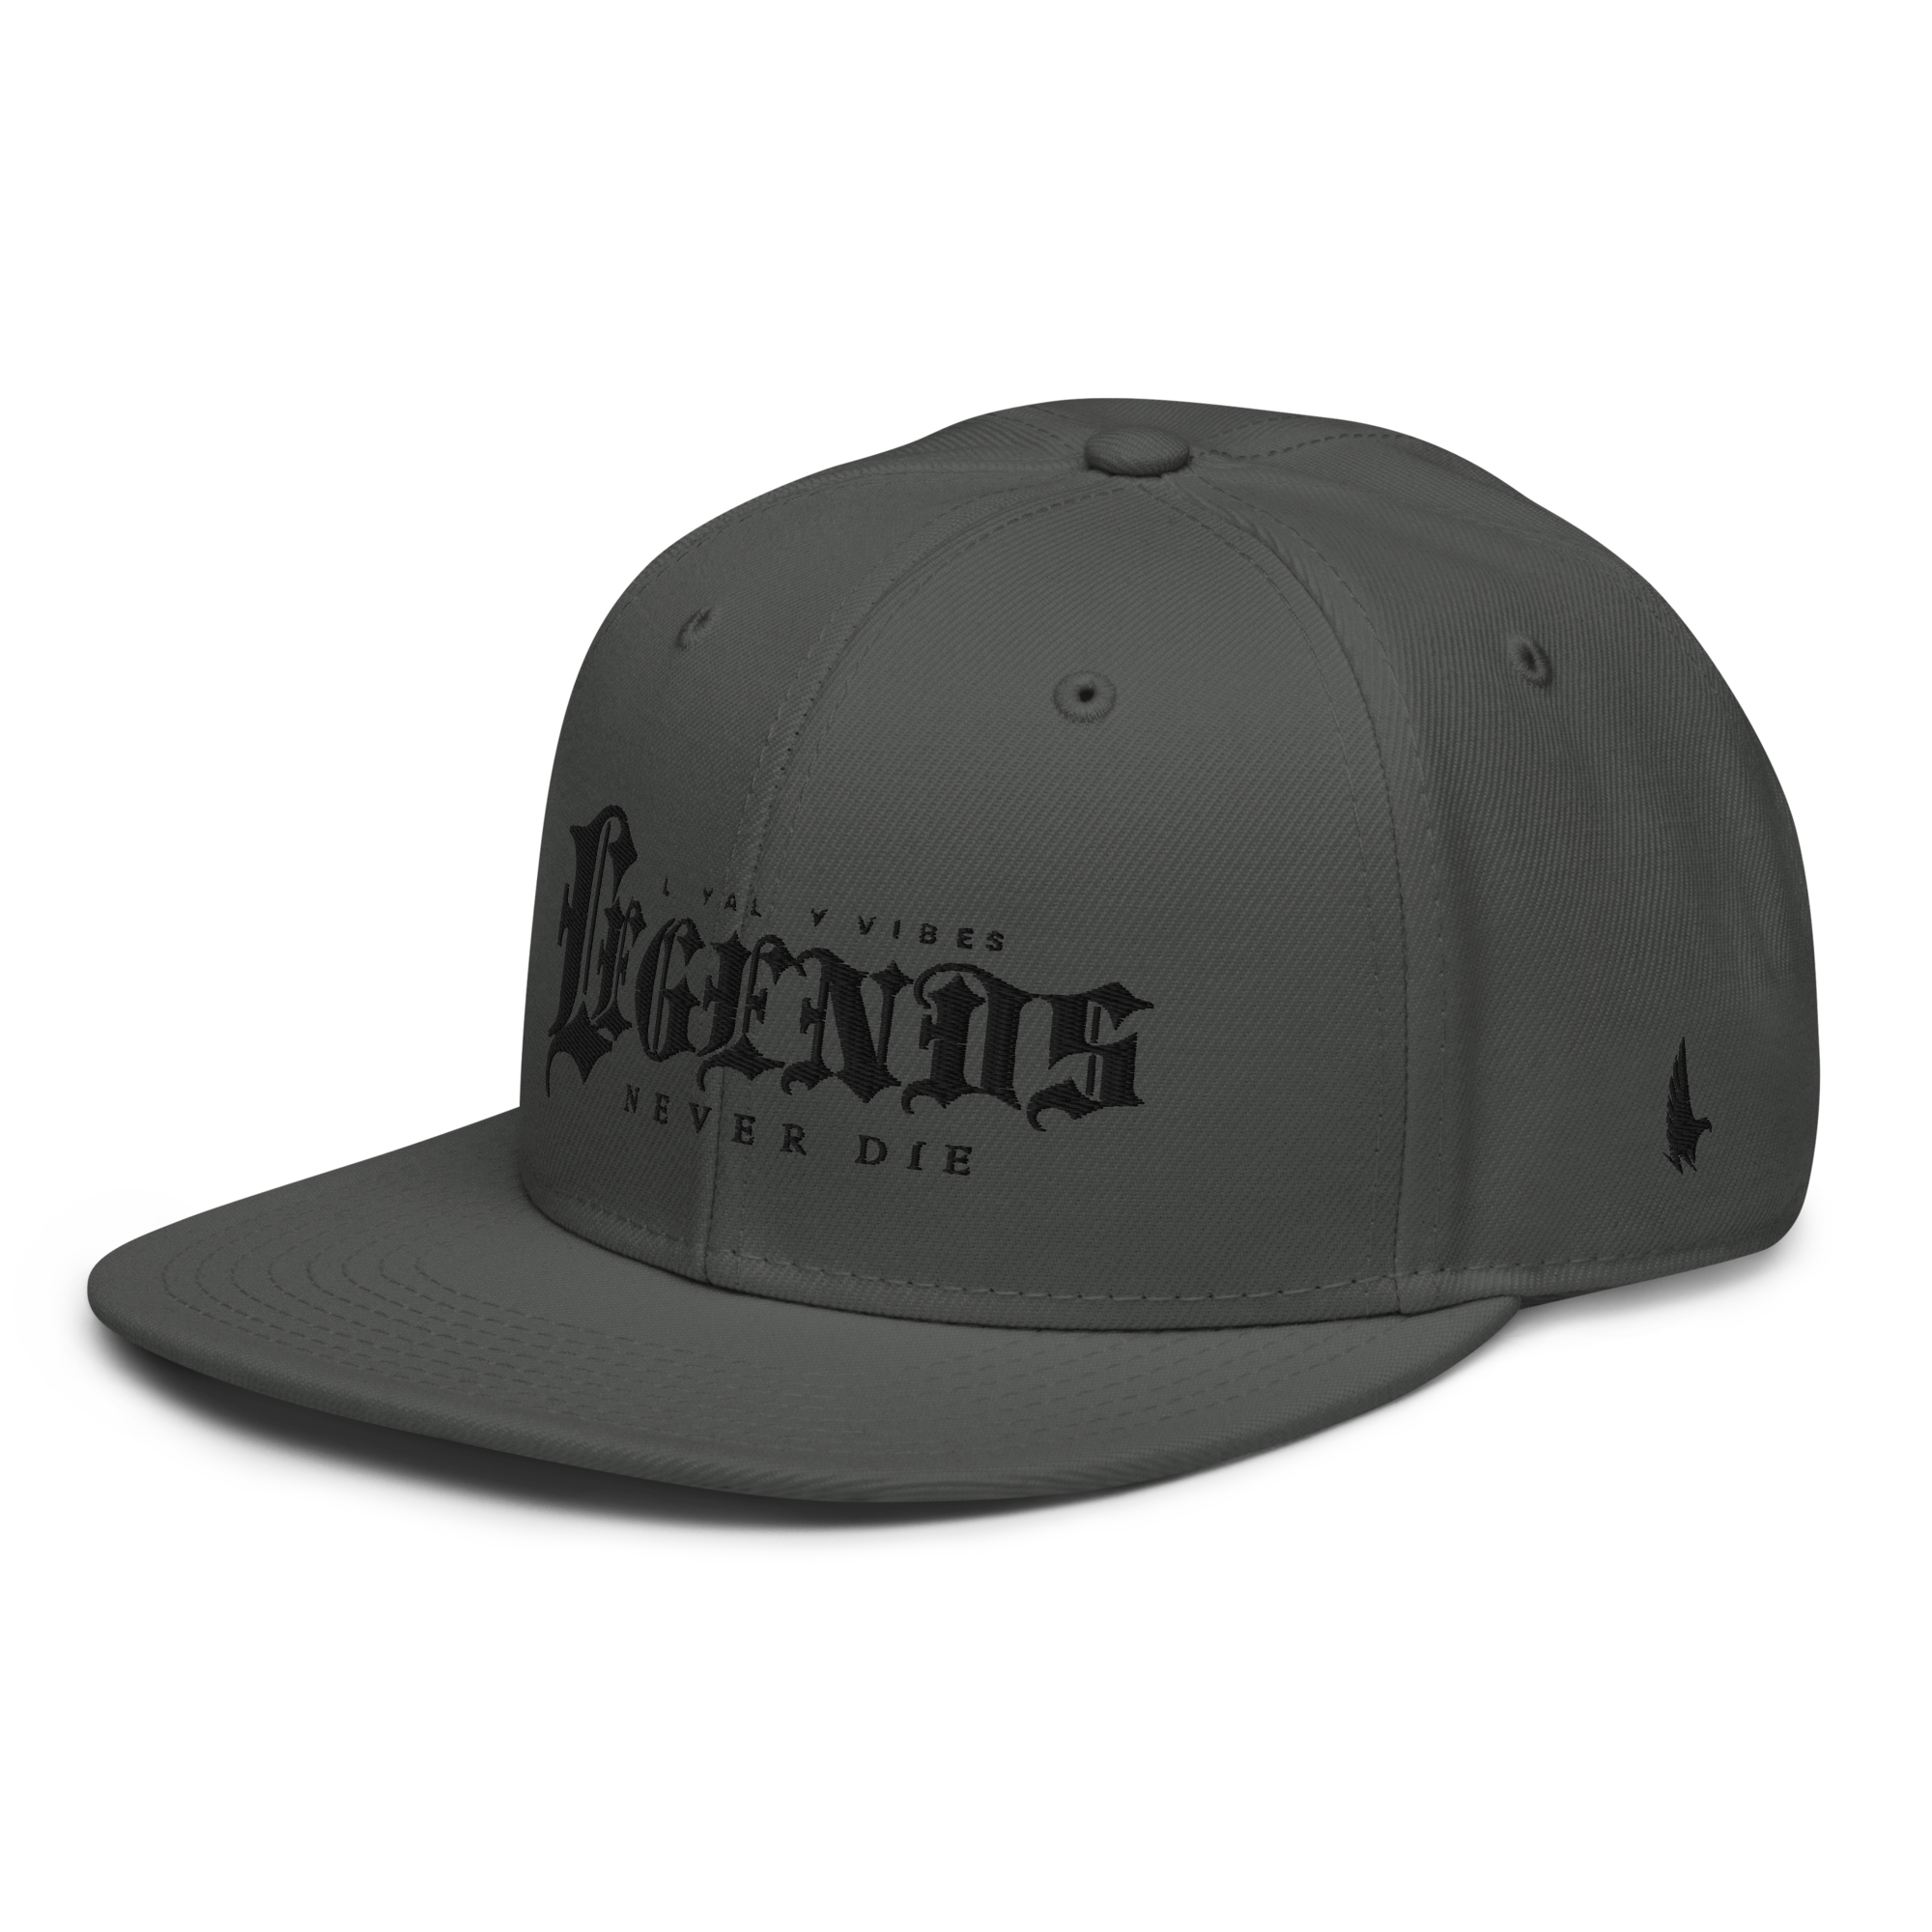 Legends Never Die Snapback Hat Charcoal Gray OS - Loyalty Vibes